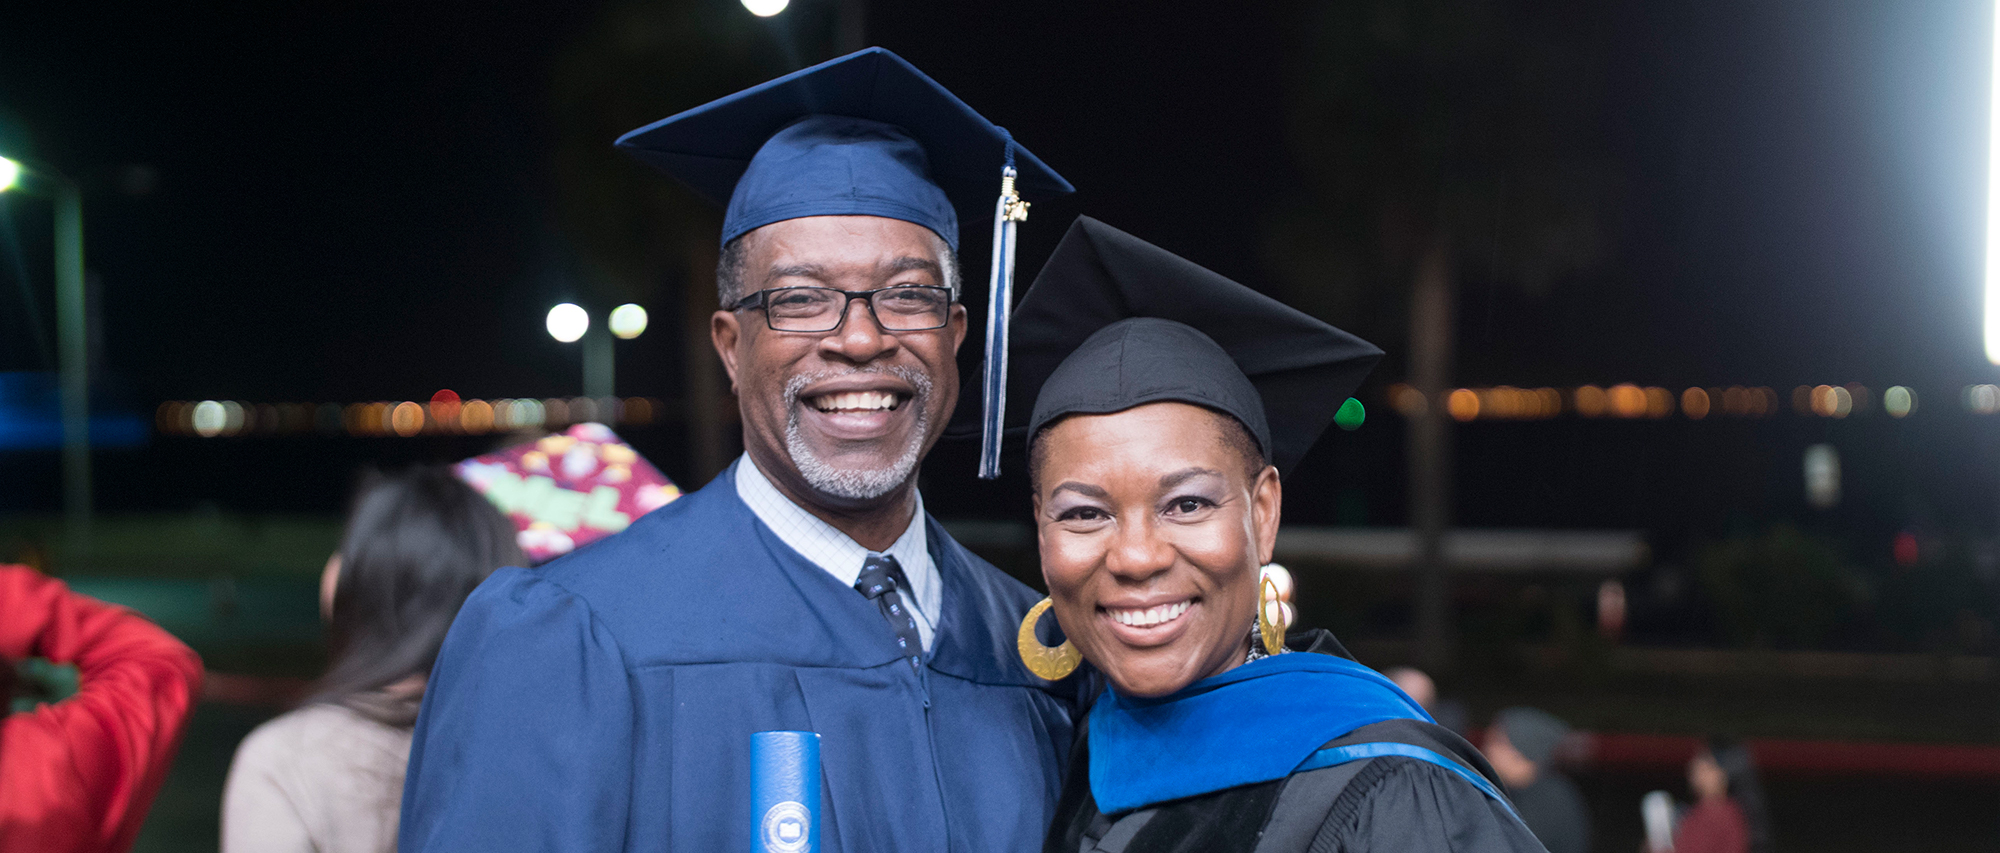 A man and woman smile and pose in their graduation caps and gowns